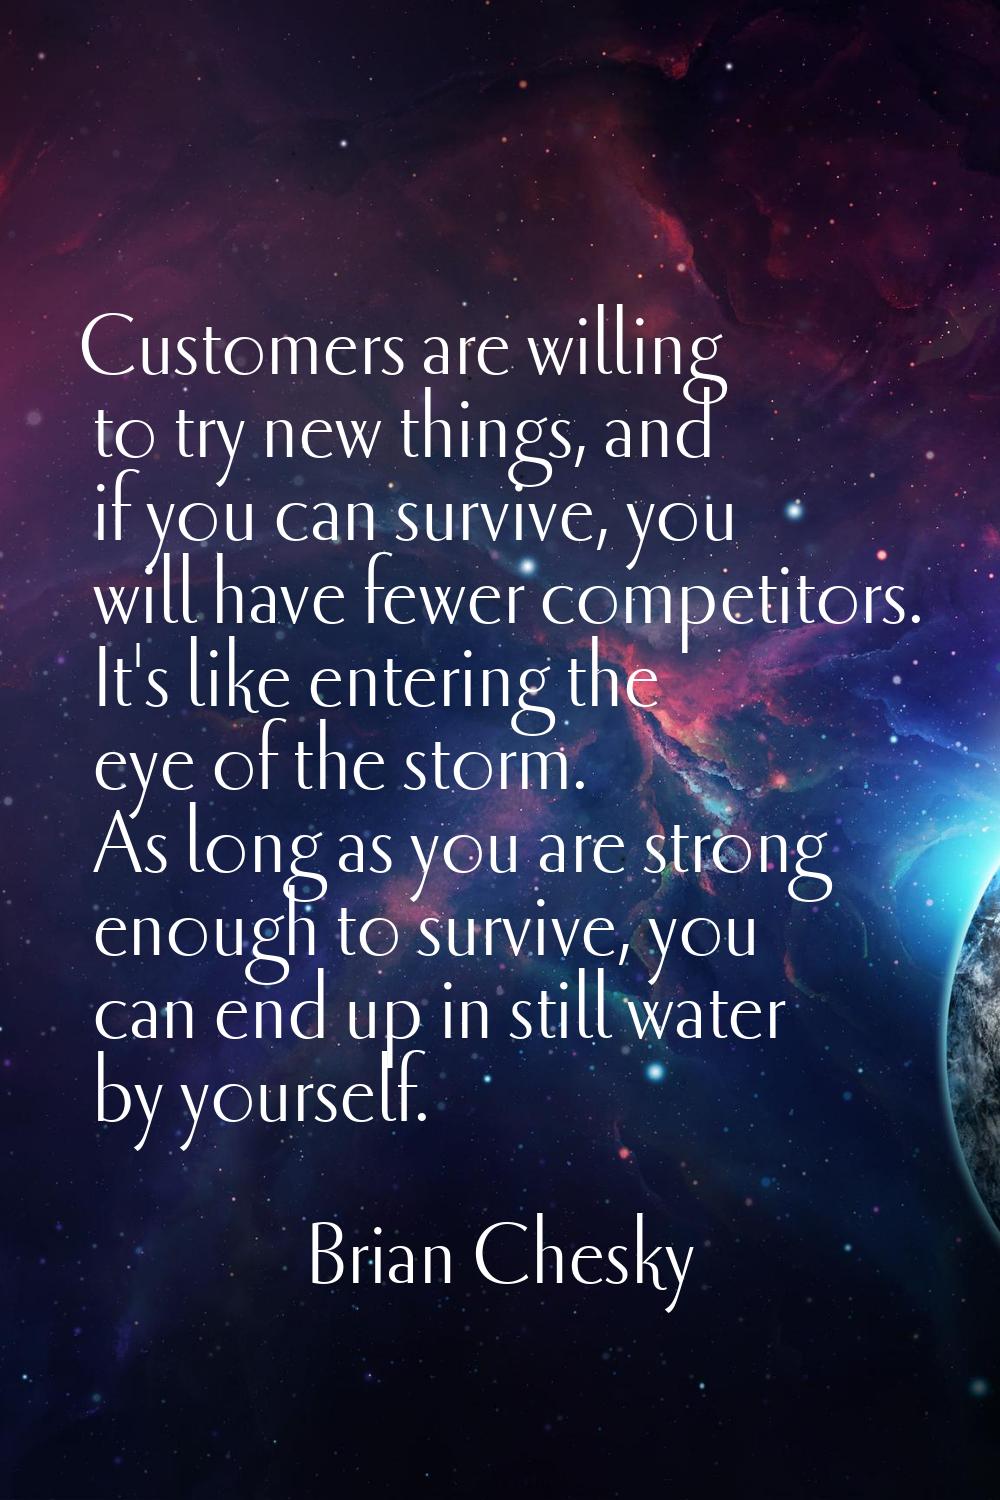 Customers are willing to try new things, and if you can survive, you will have fewer competitors. I